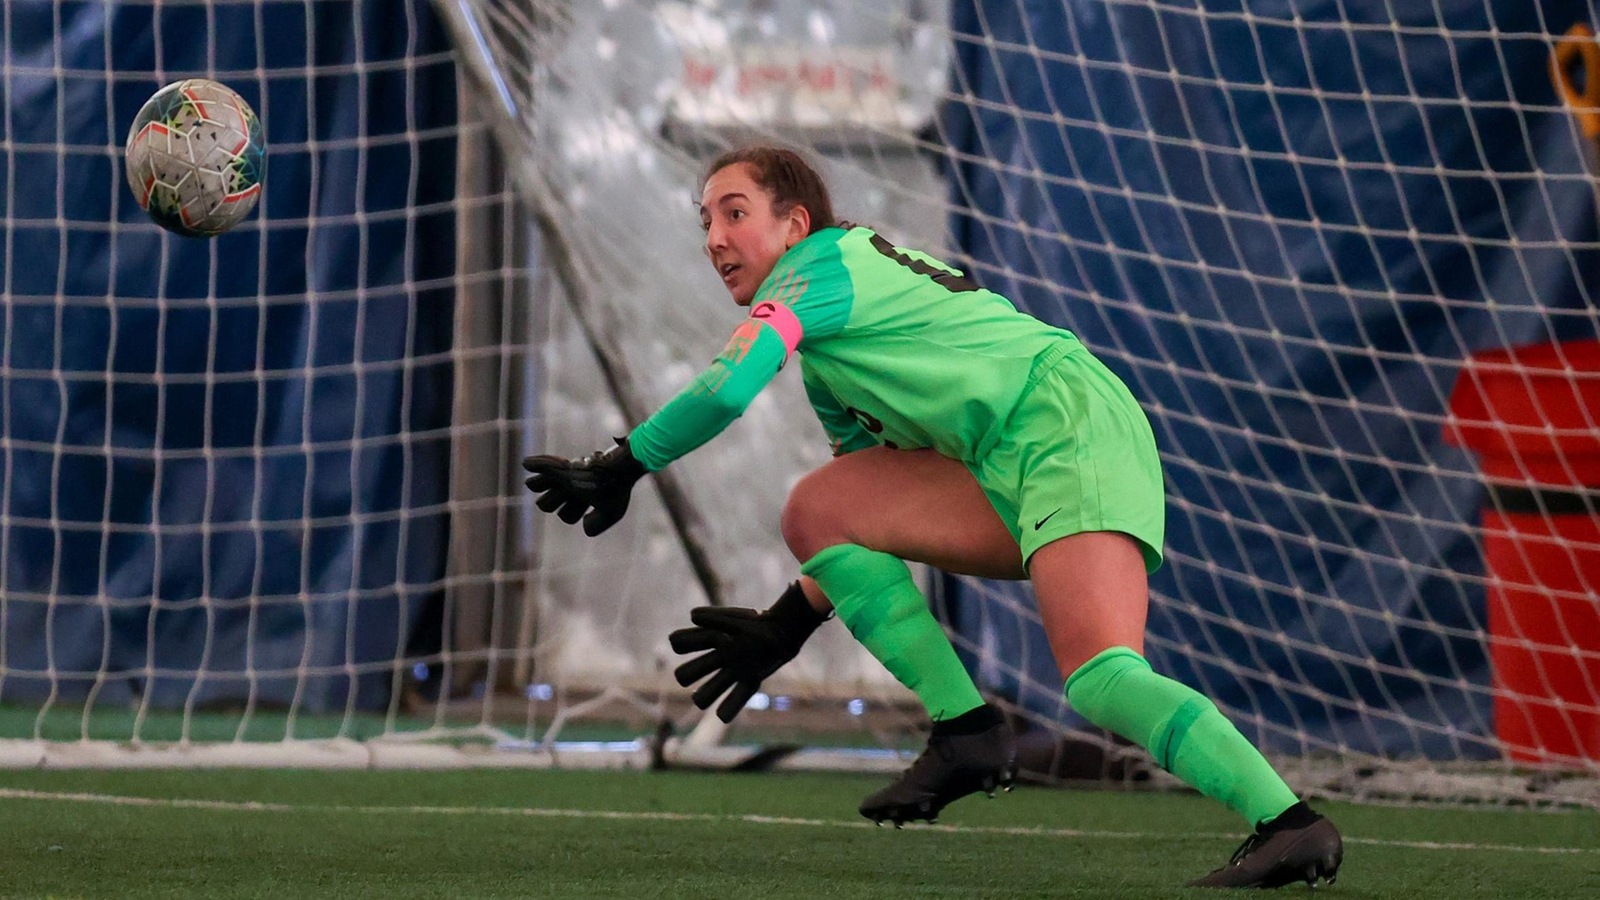 Holbrook Named #HLWSOC Defensive Player of the Week